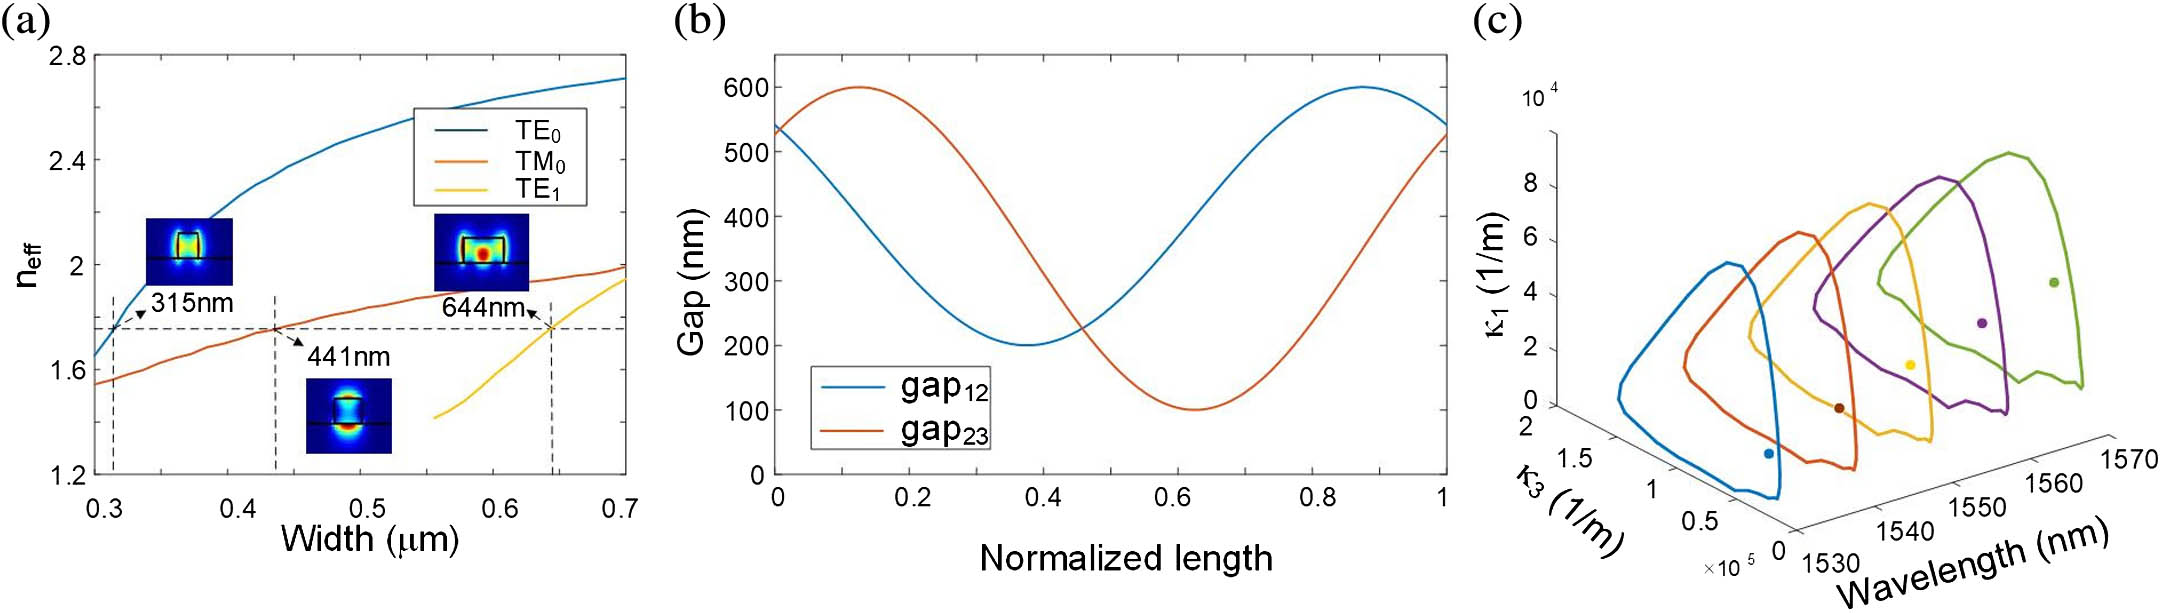 Detailed design of chiral polarizer. (a) Effective refractive index of each mode versus the width of waveguide. (b) Optimized gap transform function that generates encircling EP parametric evolution. (c) Wavelength-dependent parametric loops for the design shown in (a) and (b).